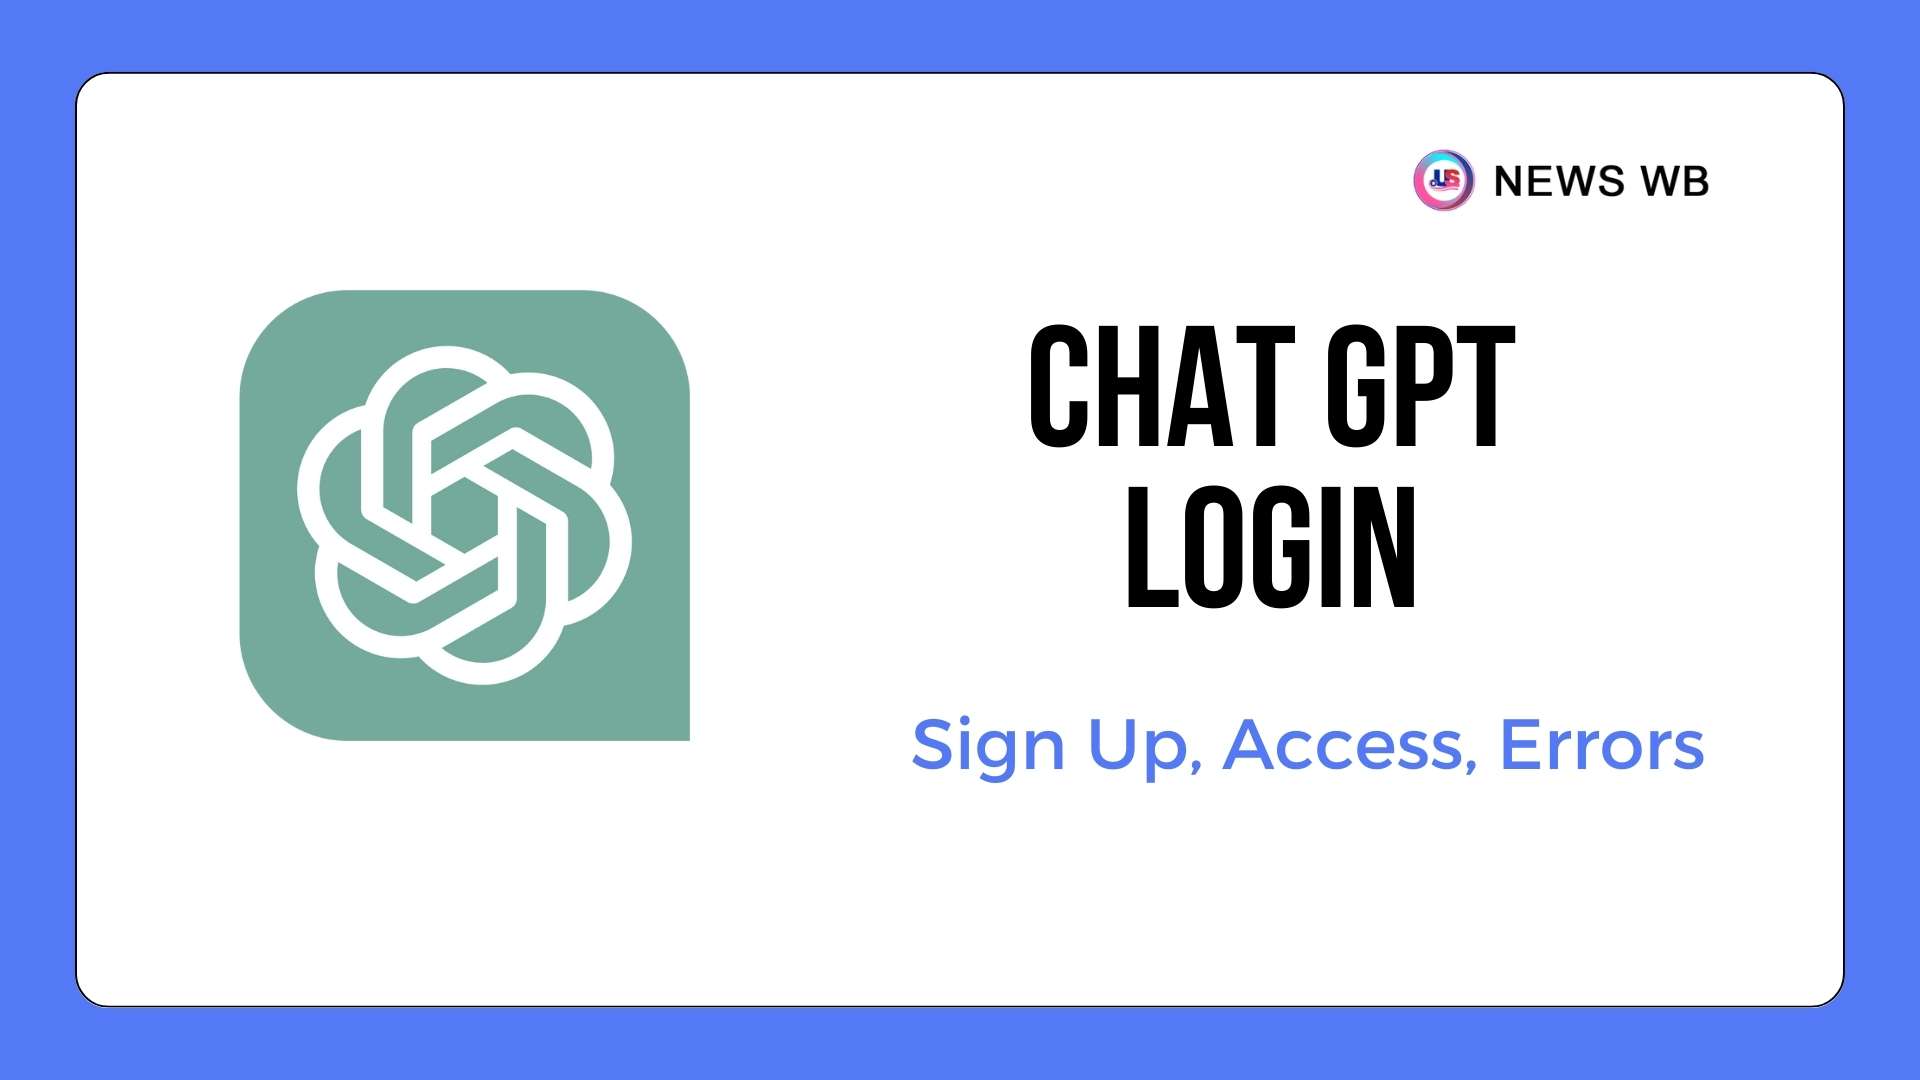 Chat GPT Login - Sign Up, Access